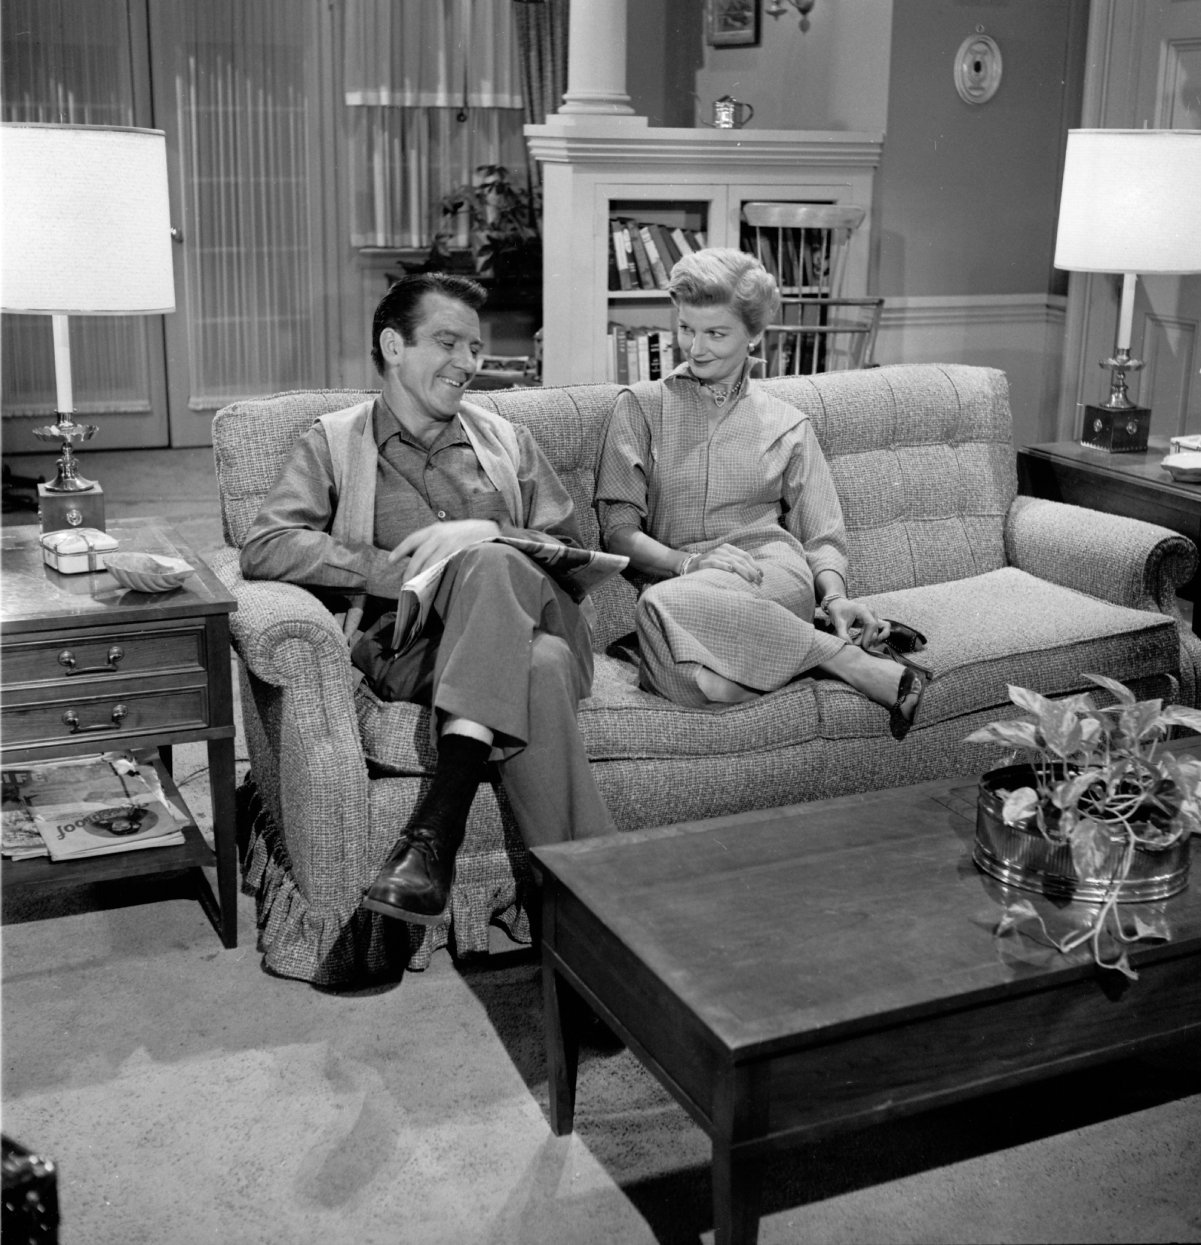 Hugh Beaumont and Barbara Billingsley in a scene from 'Leave It to Beaver'